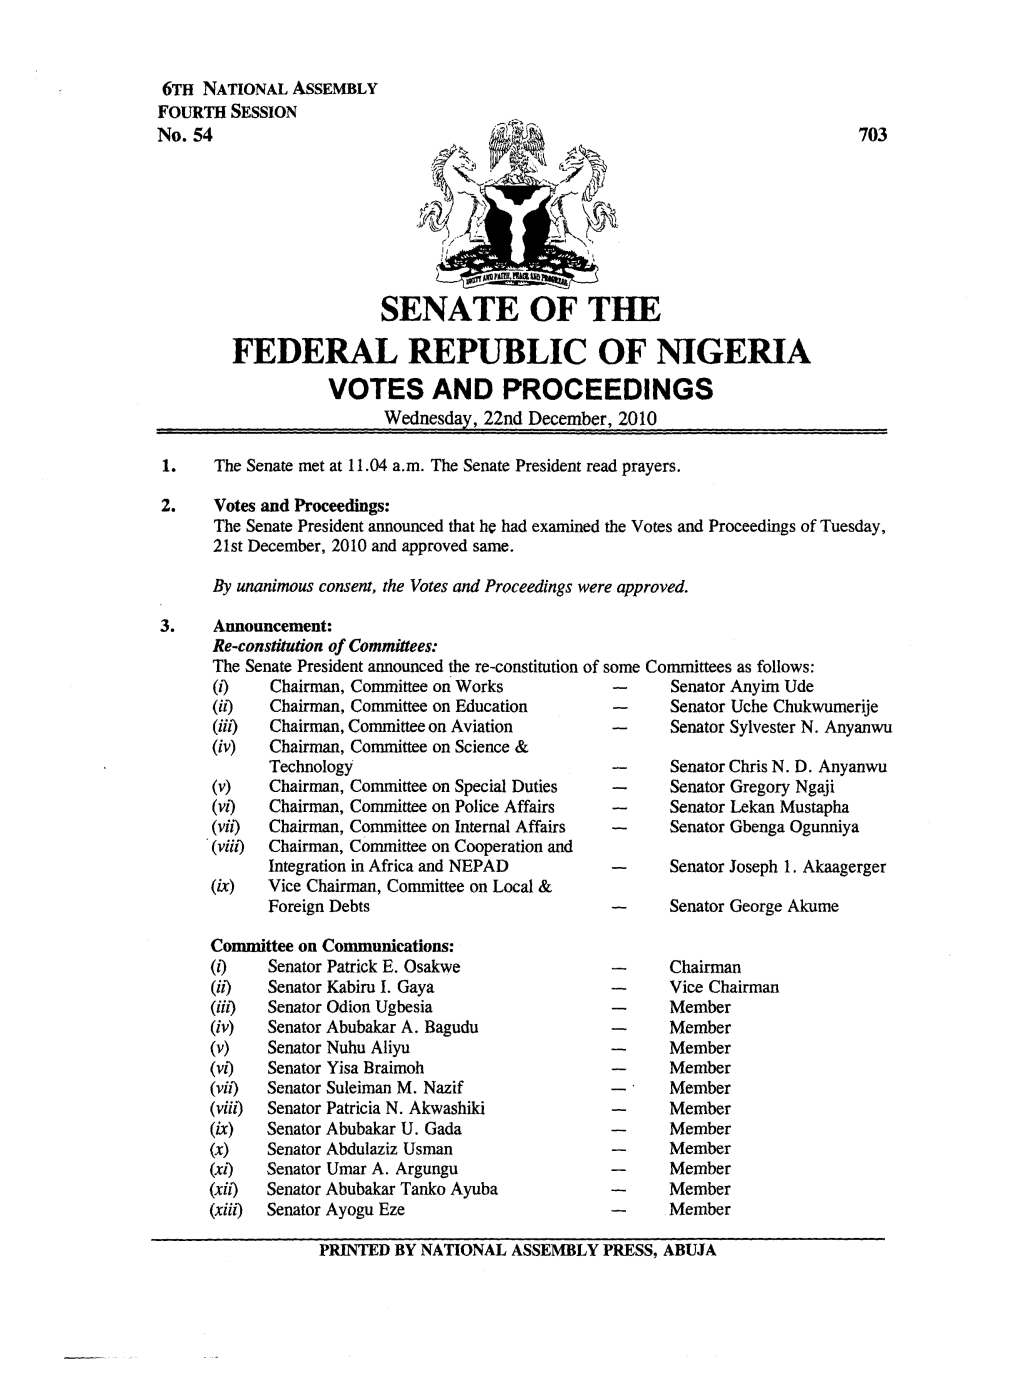 SENATE of the FEDERAL REPUBLIC of NIGERIA VOTES and PROCEEDINGS Wednesday, 22Nd December, 2010